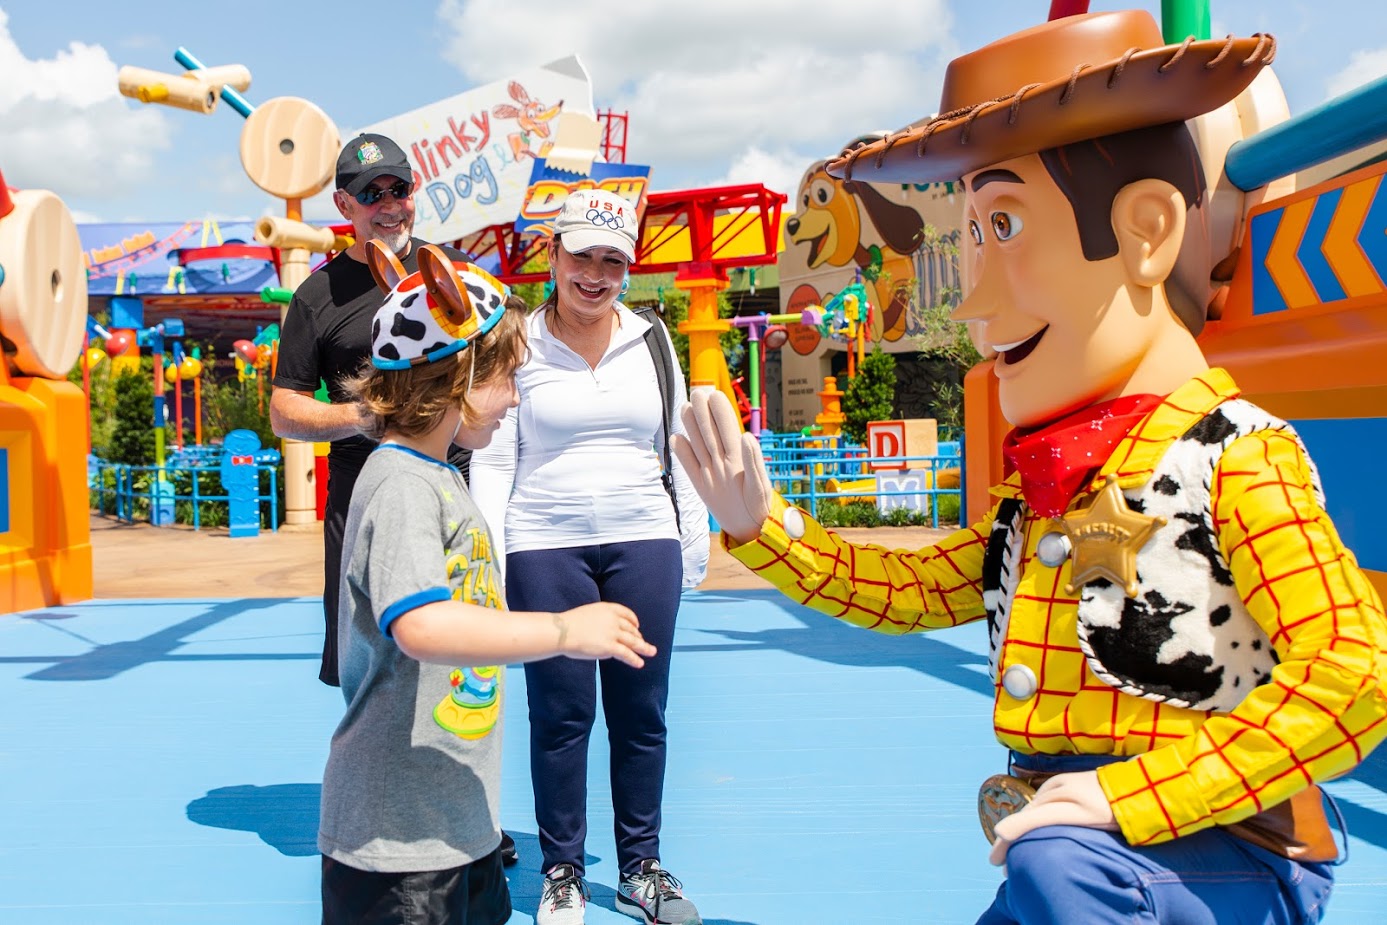 Tim Allen and Other Celebrities Visit Toy Story Land